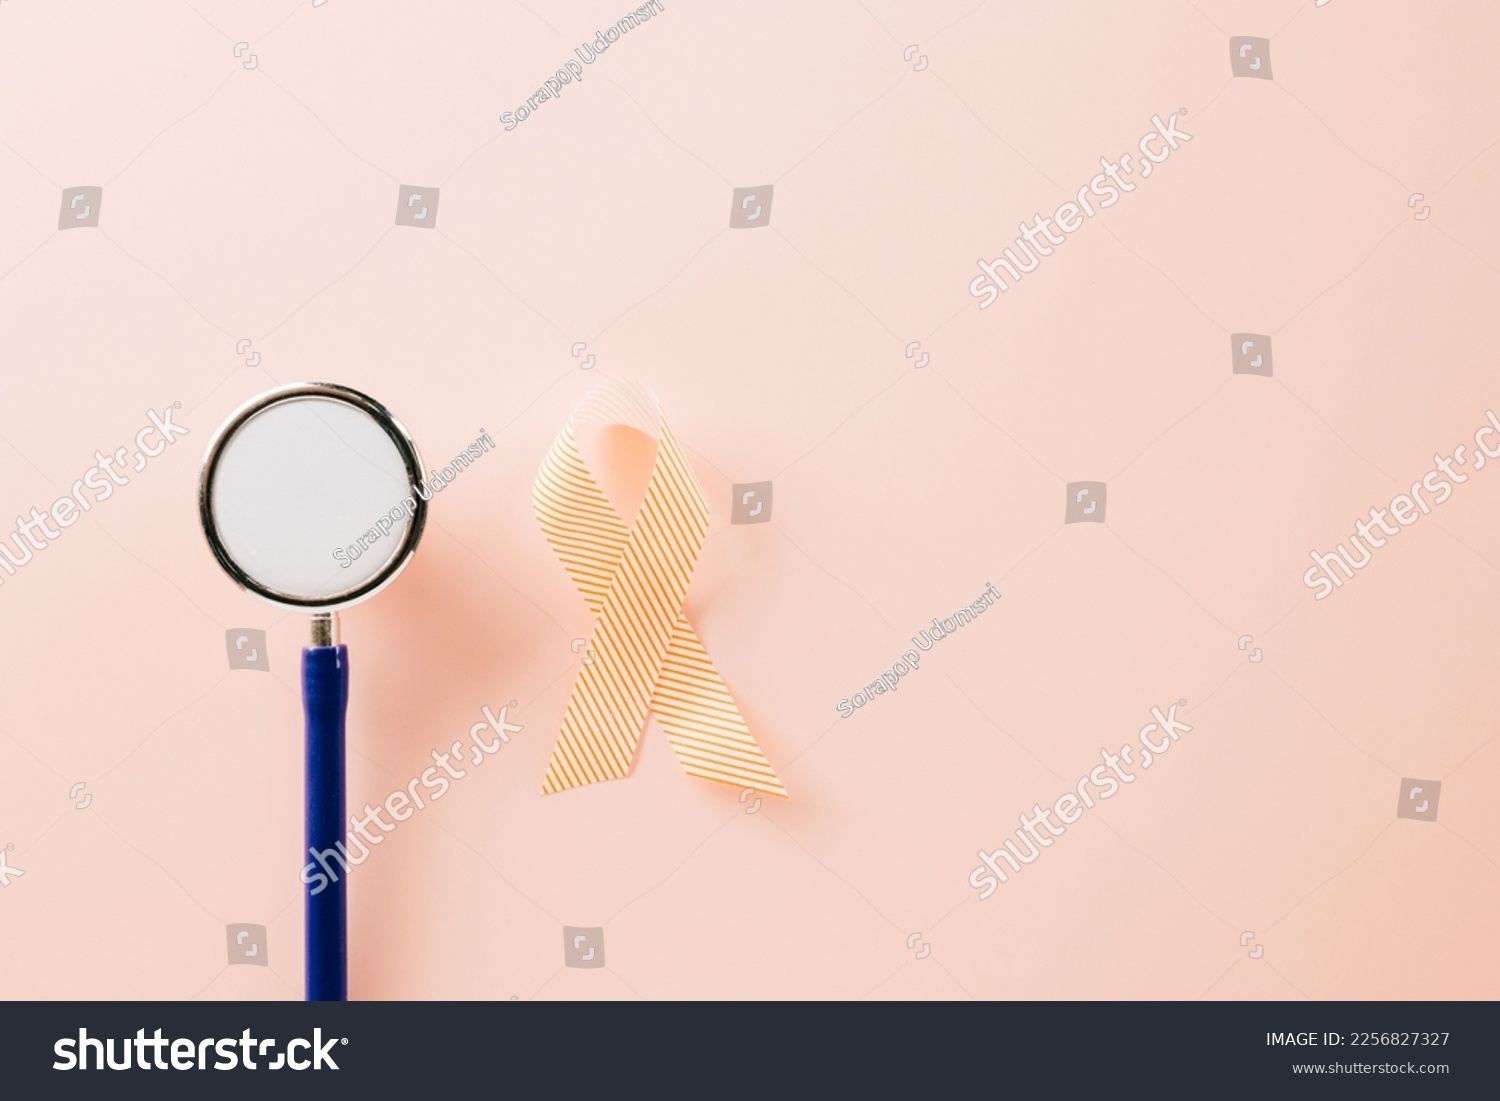 Pink awareness ribbon sign and stethoscope of International World Cancer Day campaign month on pastel pink background with copy space, concept of medical and health care support, 4 February #2256827327